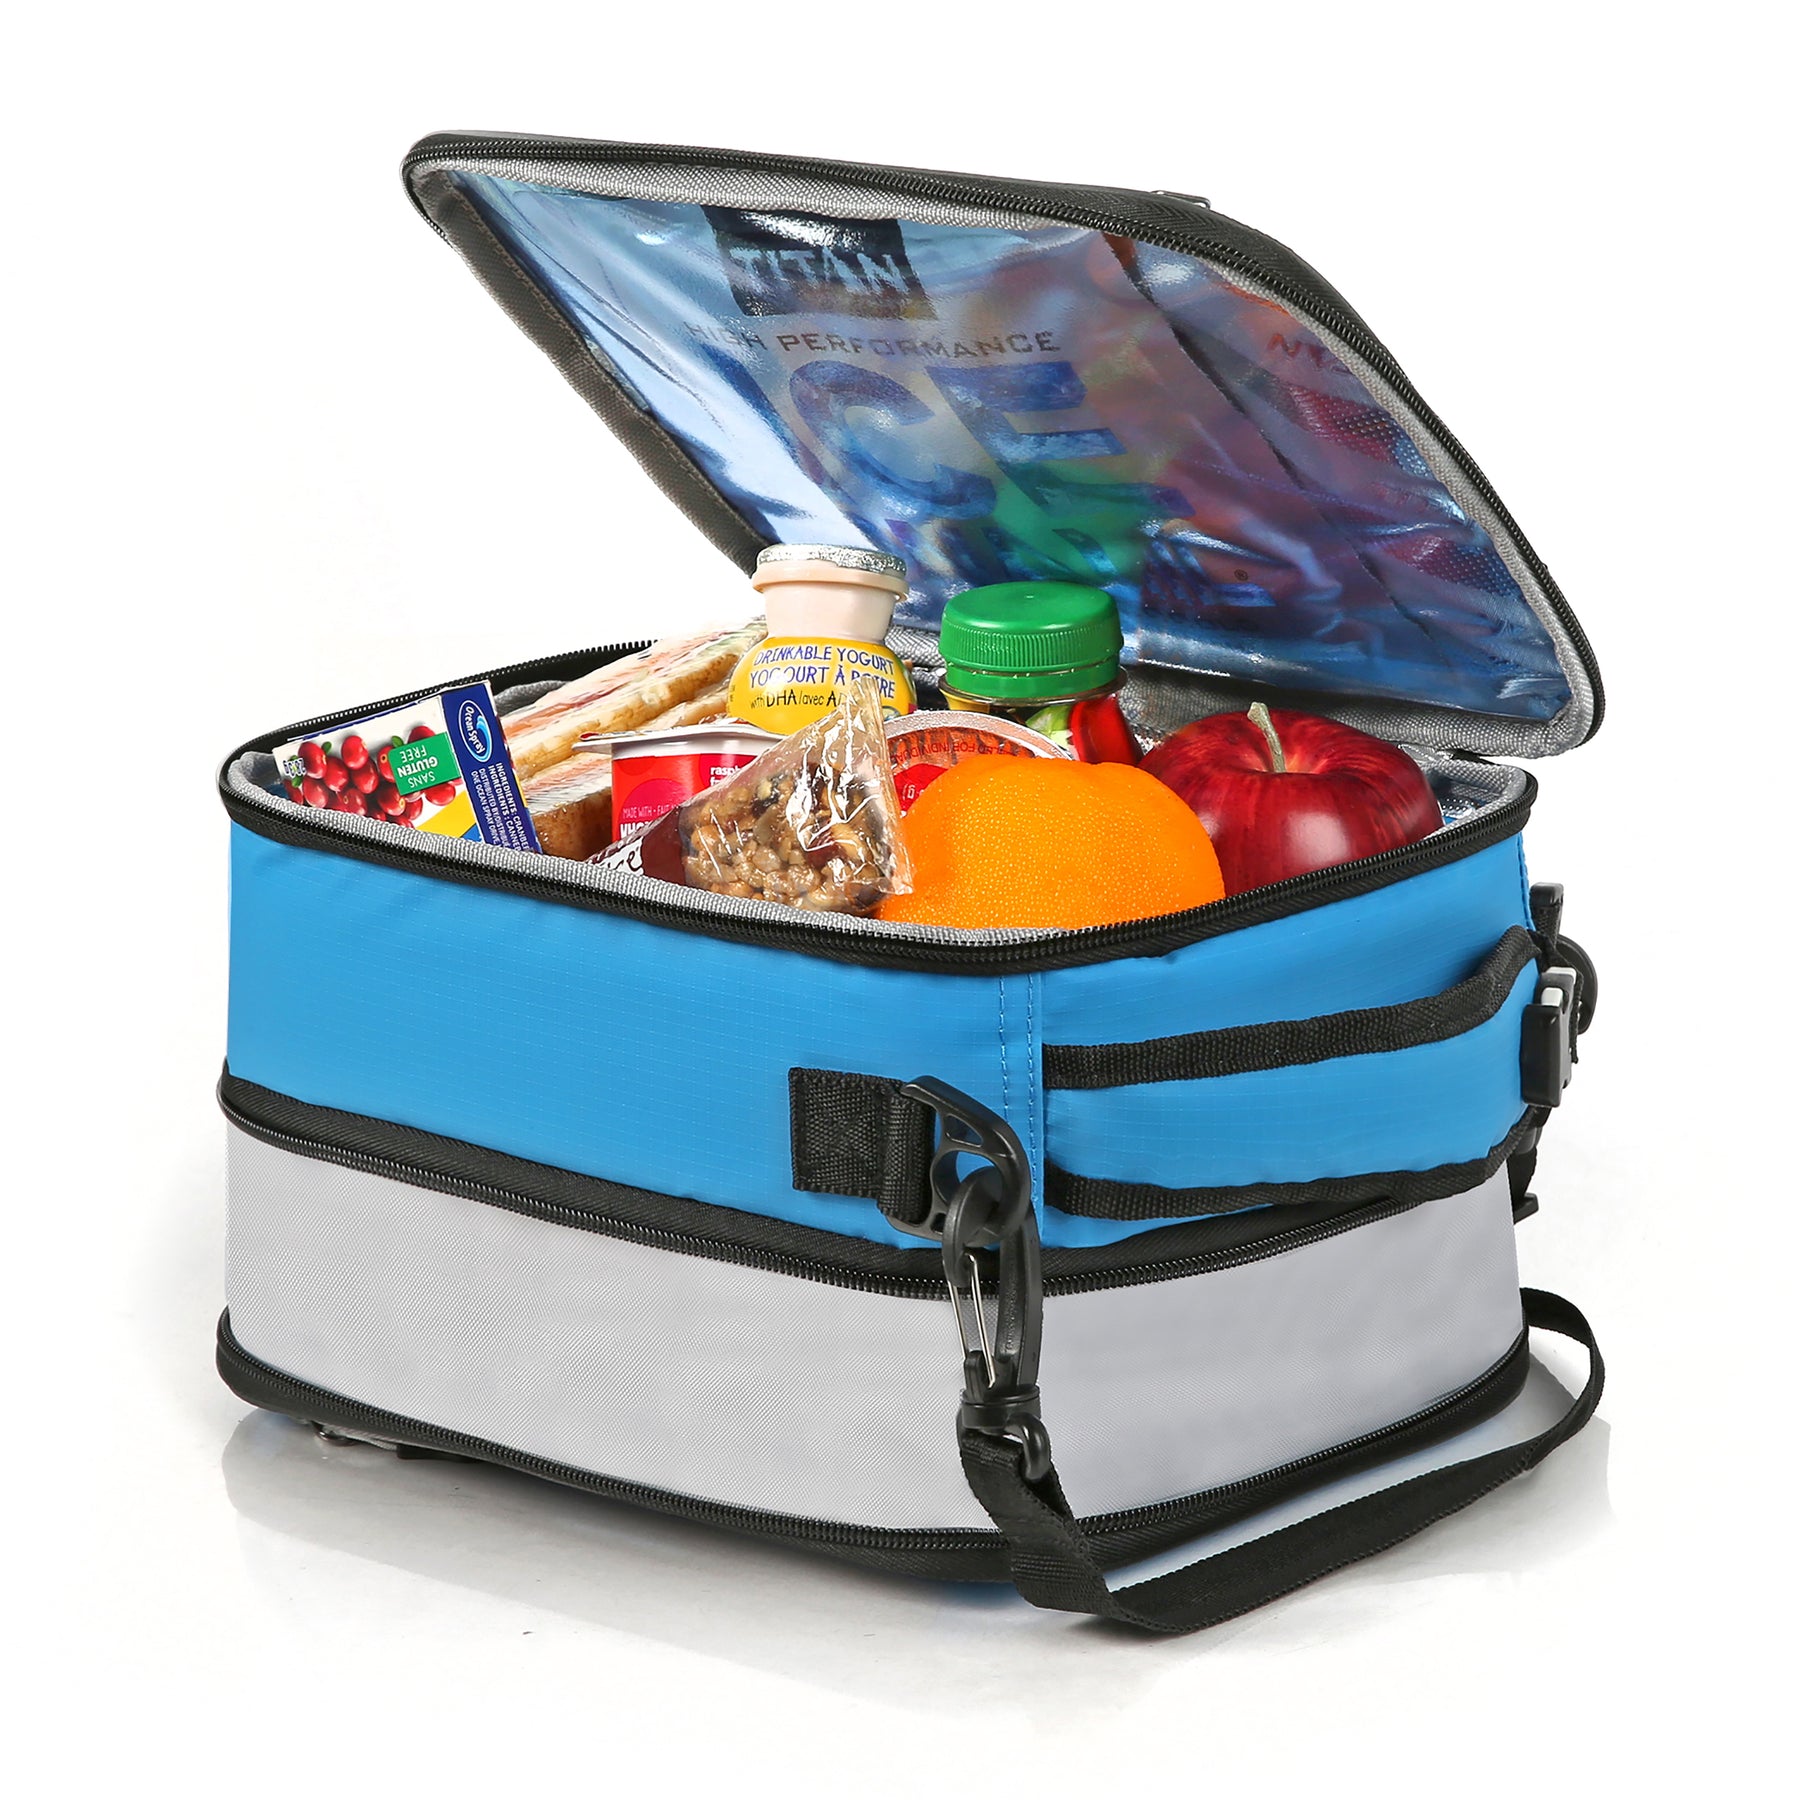 Arctic Zone Lunch Box Combo with Thermal Insulation, Blue